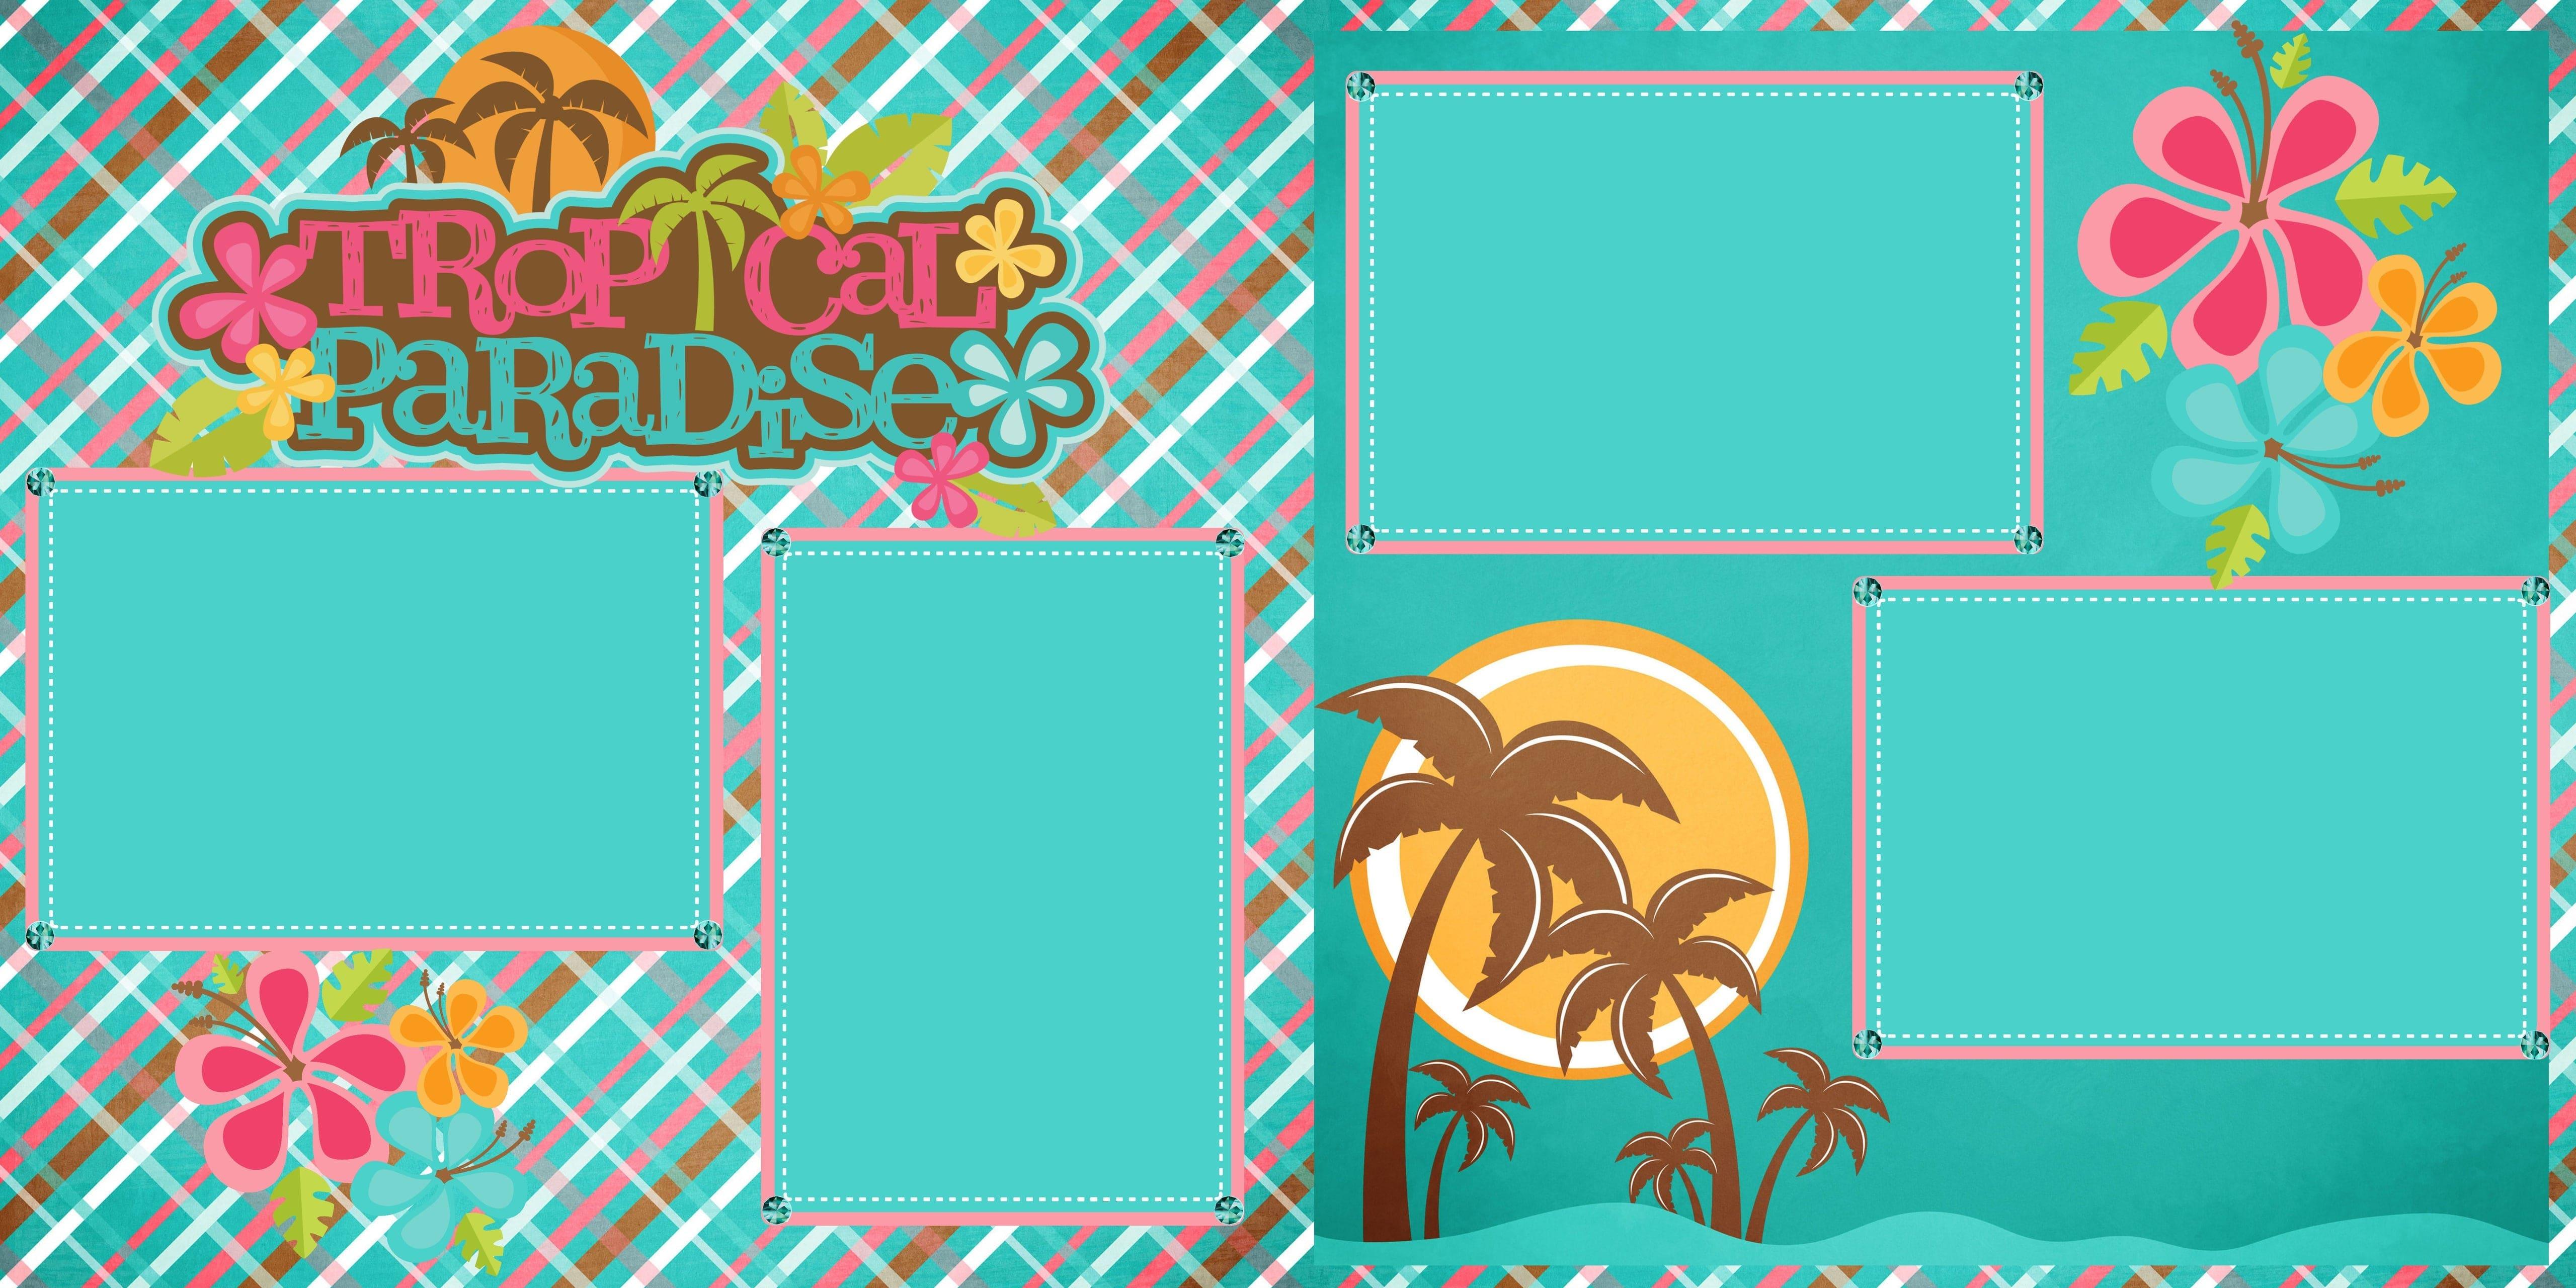 Tropical Paradise (2) - 12 x 12 Premade, Printed Scrapbook Pages by SSC Designs